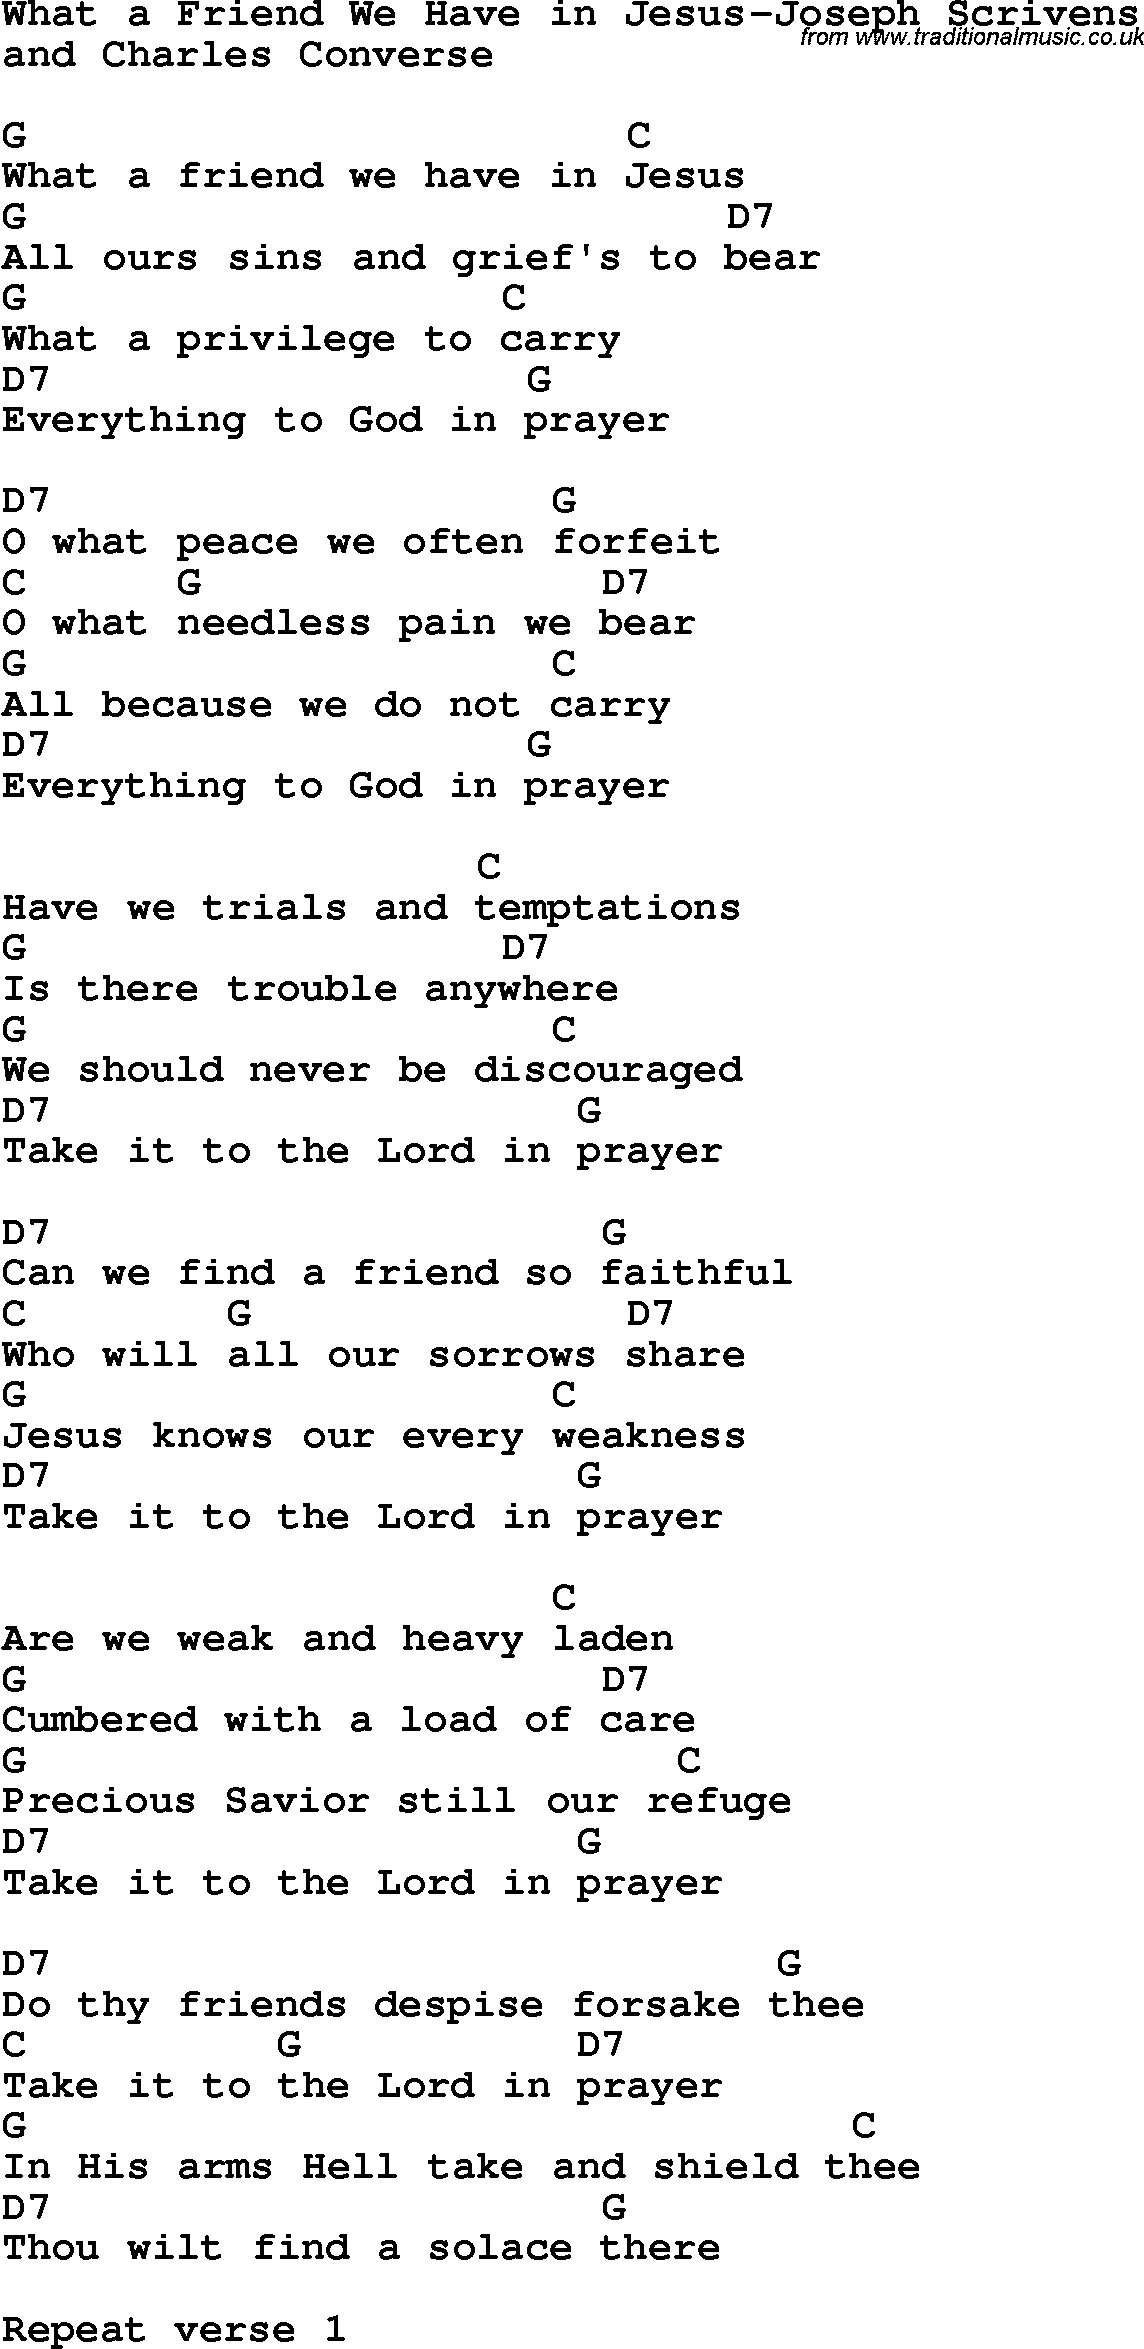 Country, Southern and Bluegrass Gospel Song What a Friend We Have in Jesus-Joseph Scrivens lyrics and chords